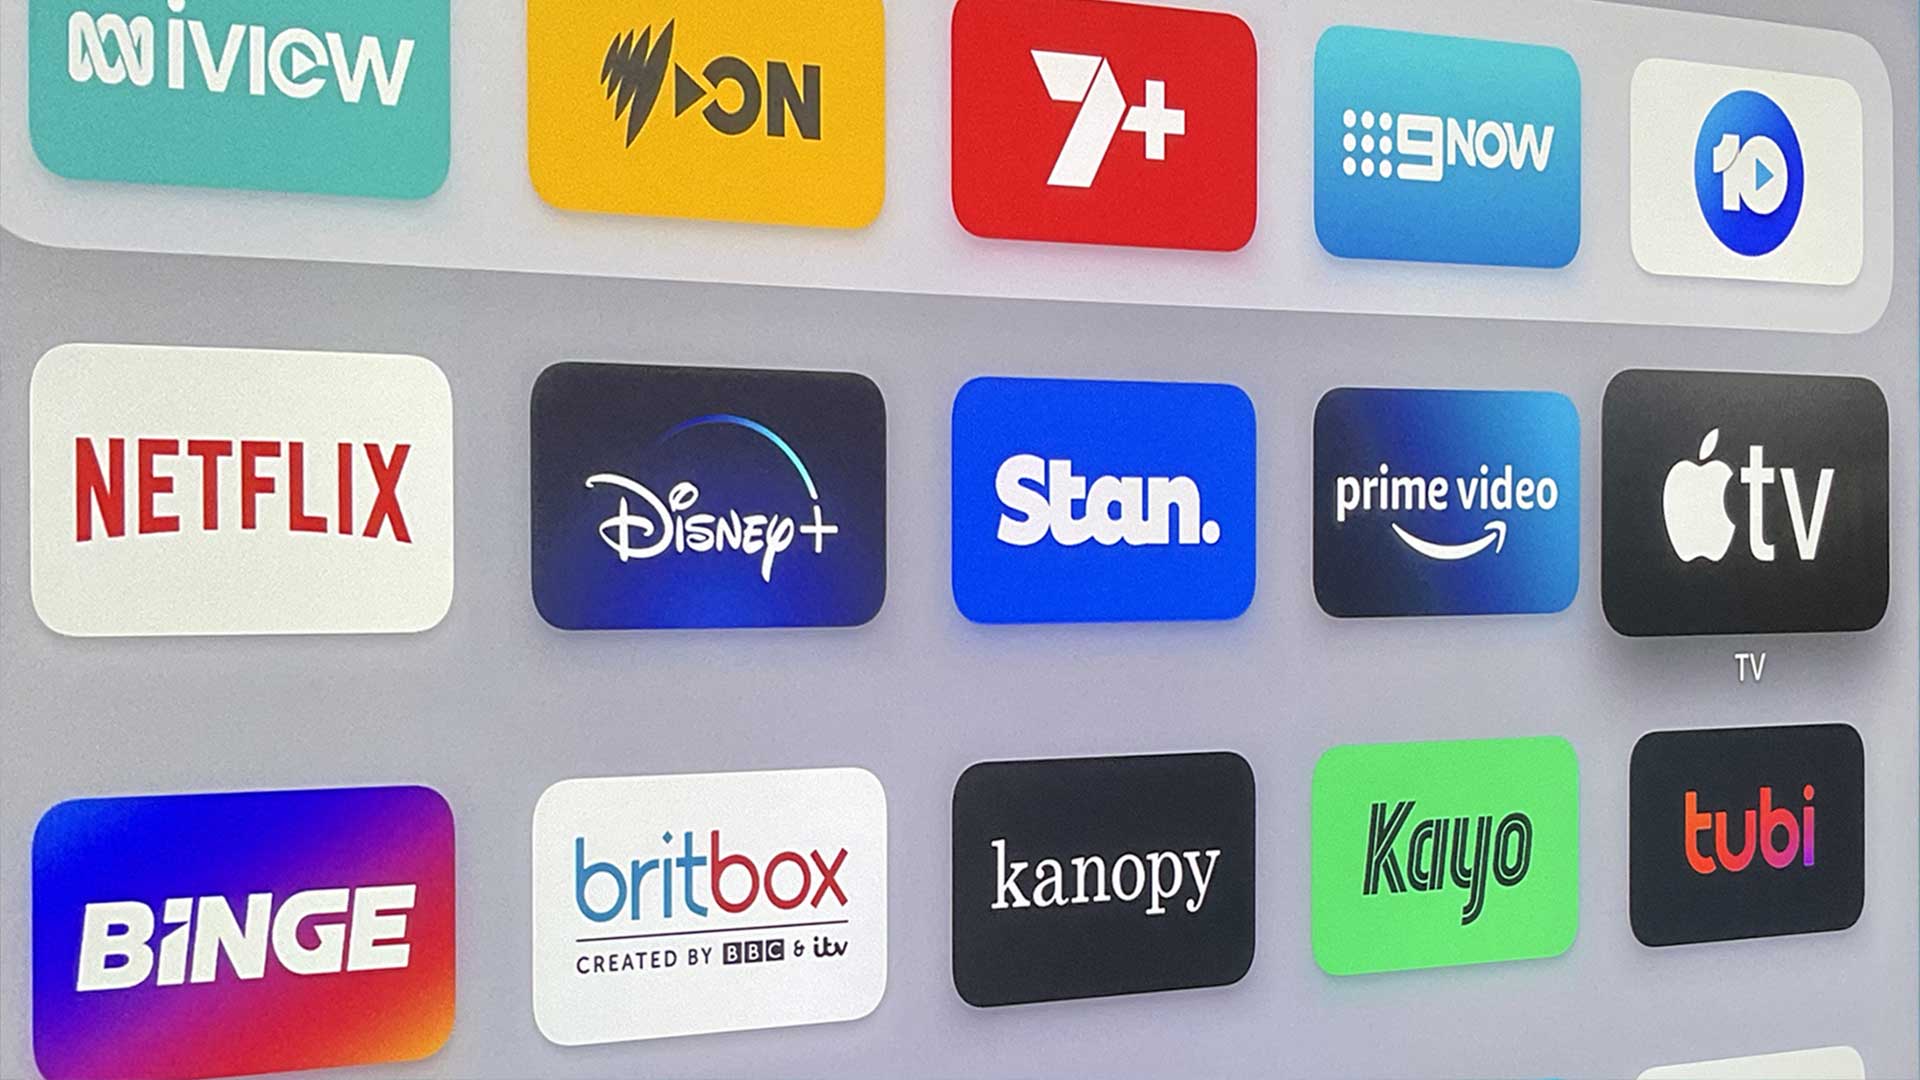 They Don’t Make Them Like They Used To - streaming services australia - Ivicw Netflix Binge Won 7 Disney britbox Created By Bbc & itv Stan. Now 10 prime video tv Tv kanopy Kayo tubi